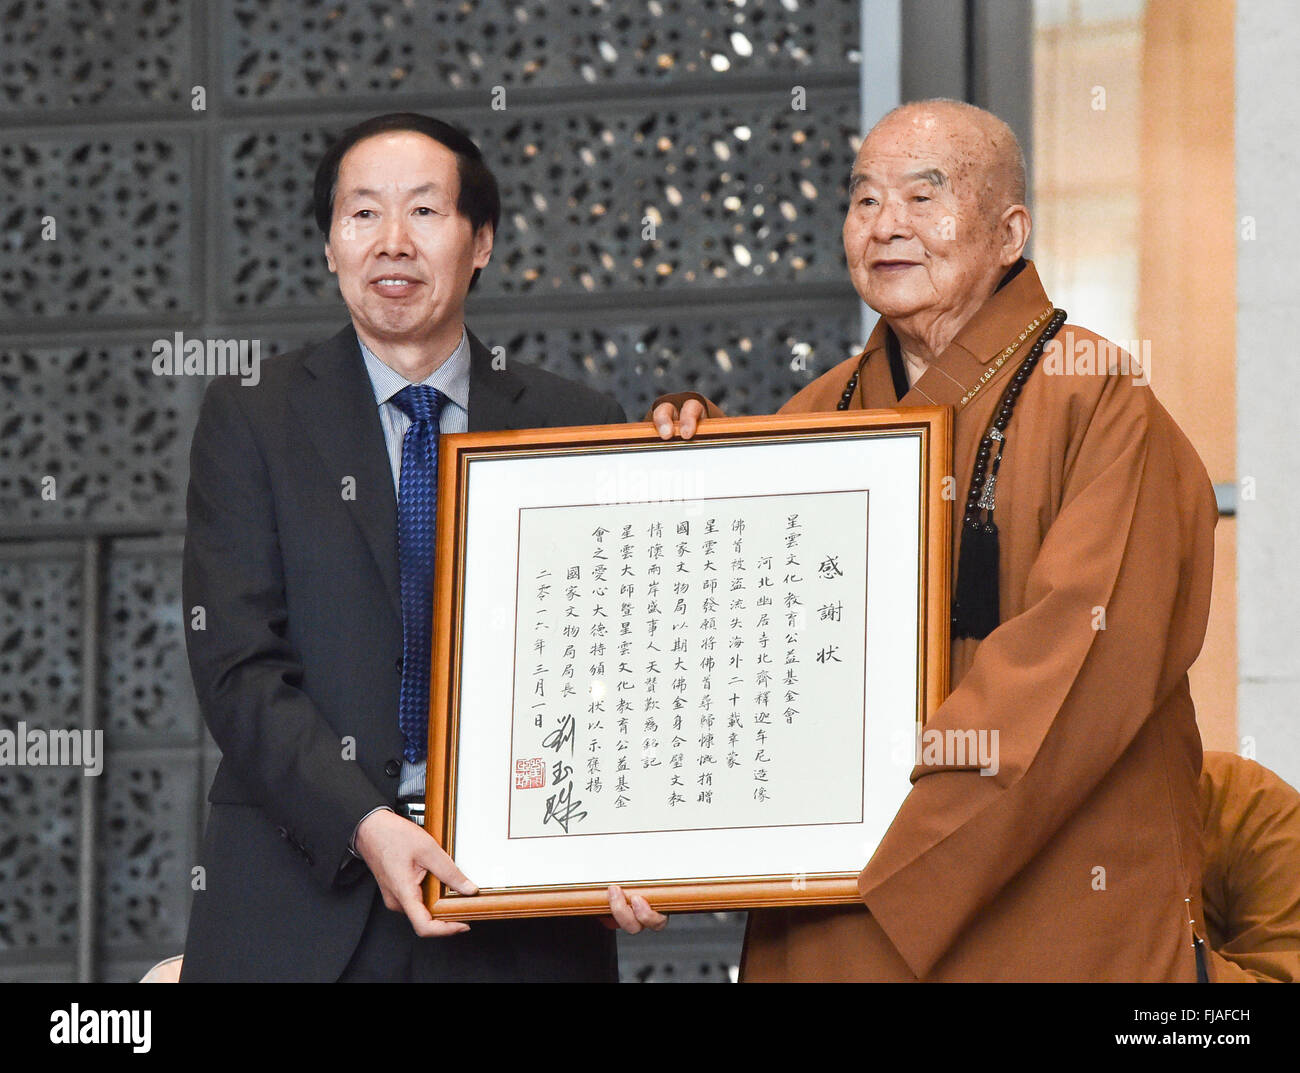 (160301) -- BEIJING, March 1, 2016 (Xinhua) -- Liu Yuzhu (L), head of the State Administration of Cultural Heritage, presents a certificate of appreciation to Master Hsing Yun, for his returning of a head of an ancient Buddha statue of the North Qi dynasty during a ceremony in Beijing, capital of China, March 1, 2016. The white marble Buddha statue, which was made around 556, was originally worshipped at Youju Temple in north China's Hebei Province, where the Buddha's head was stolen in 1996. Master Hsing Yun, founder of Fo Guang Shan Monastery in Taiwan, decided to return the 80 kg statue hea Stock Photo